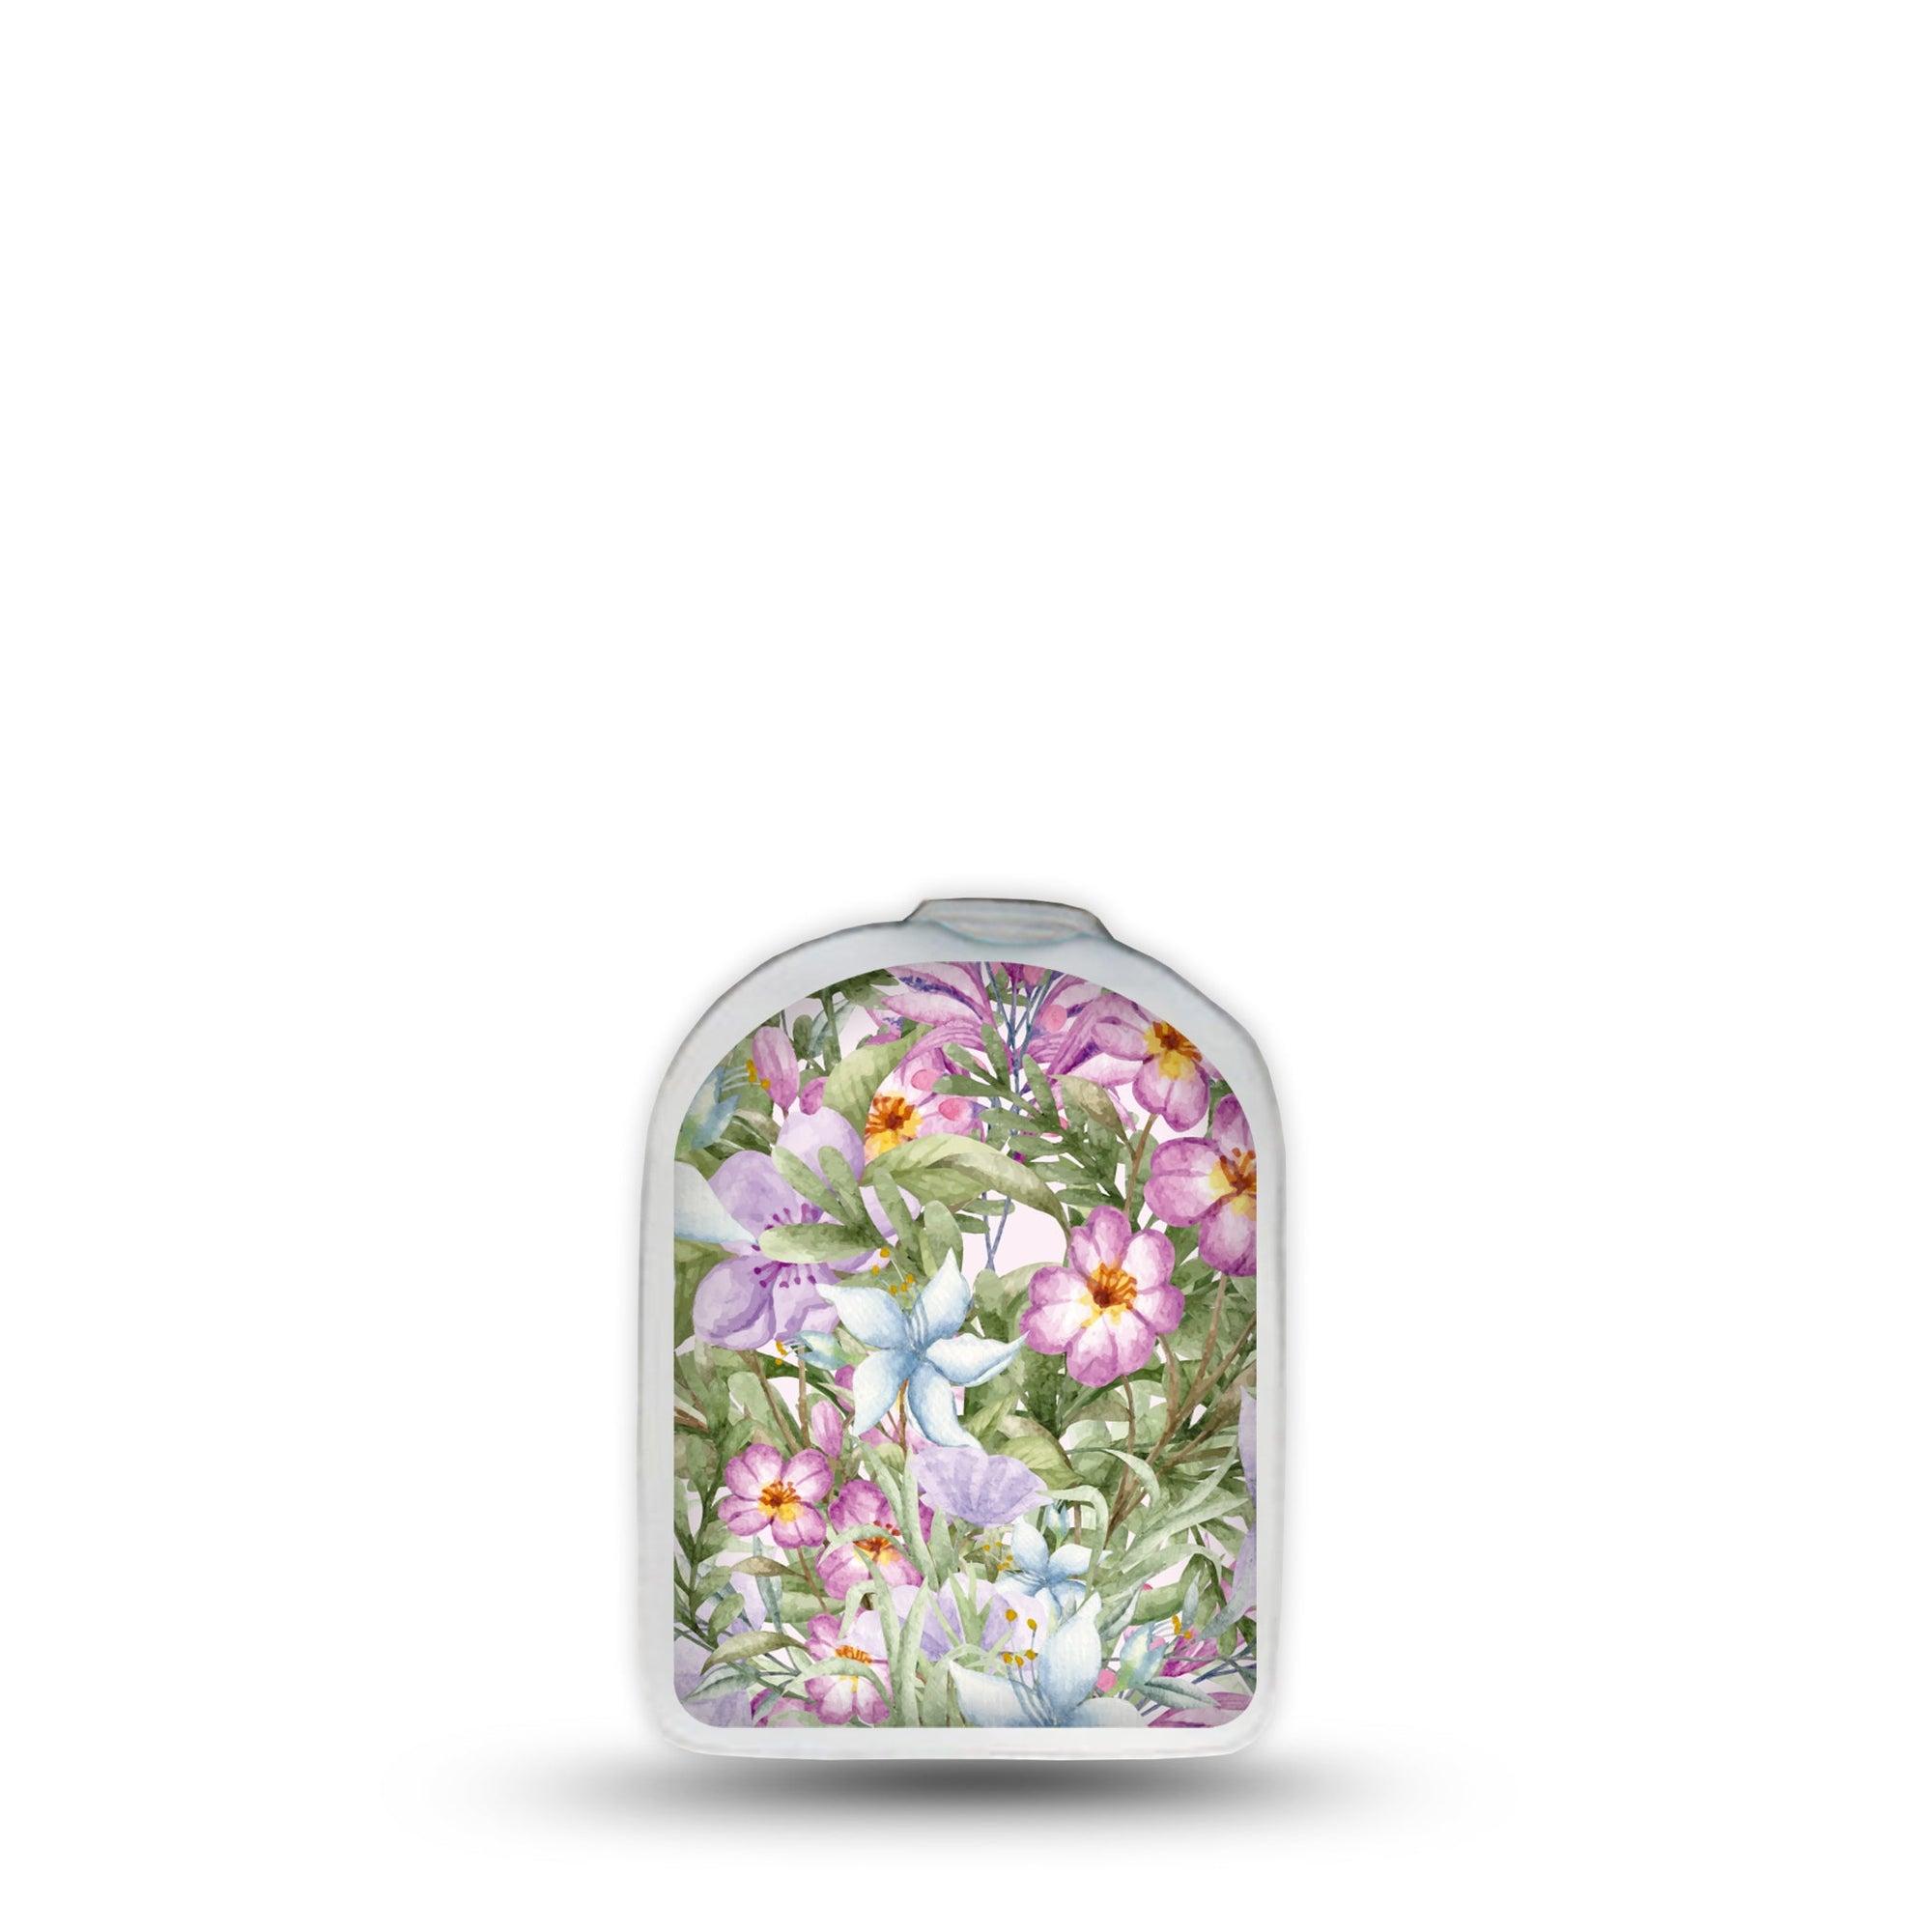 ExpressionMed Thriving Blossoms Omnipod Surface Center Sticker Single Sticker Floral Bouquet Inspired Vinyl Decoration Pump Design